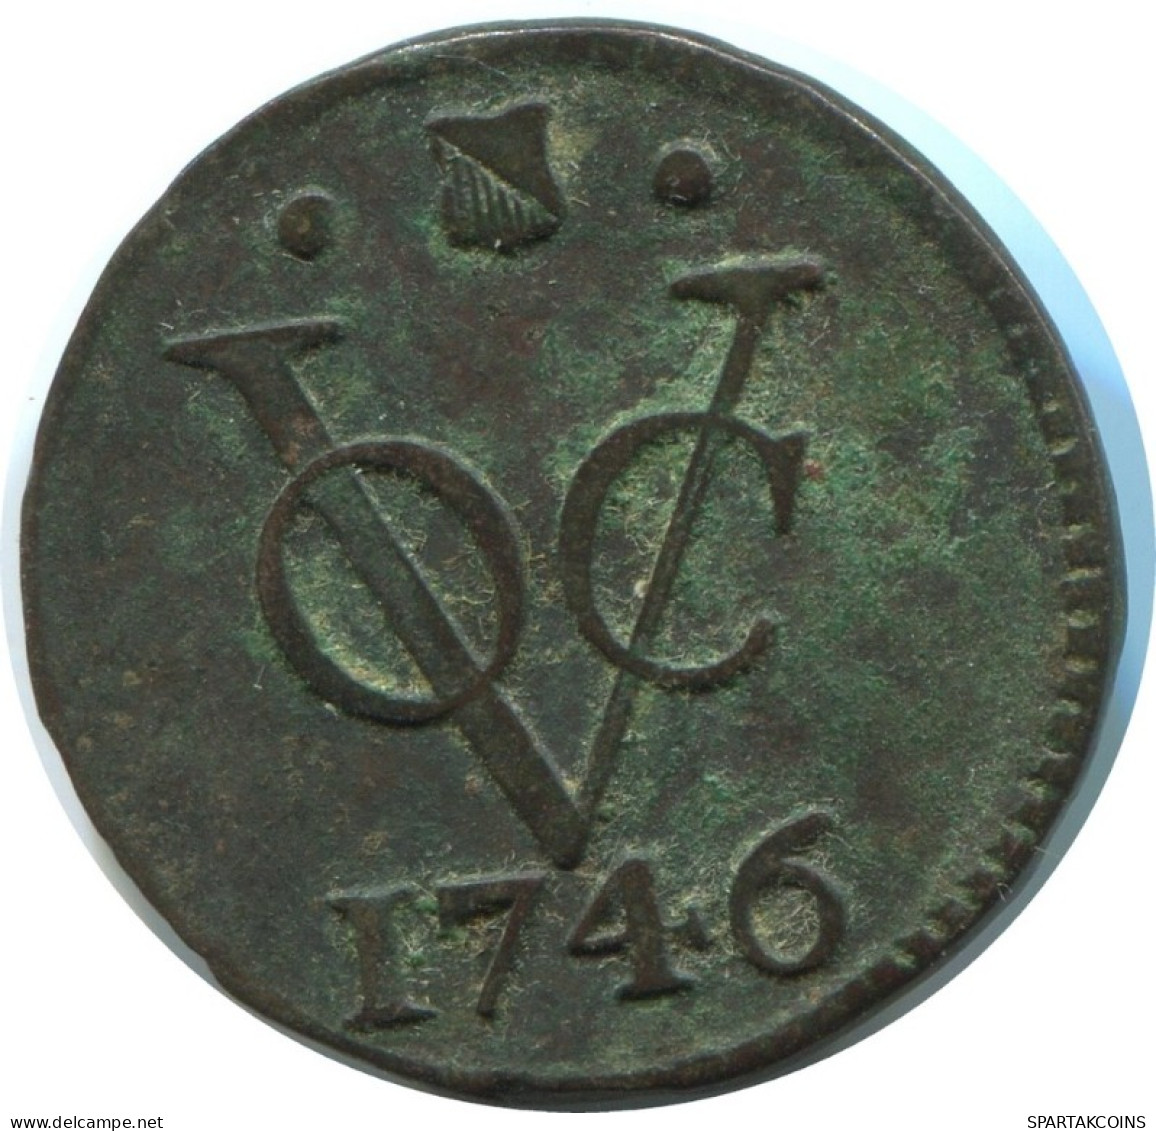 1746 UTRECHT VOC DUIT NETHERLANDS EAST INDIA NEW YORK COLONIAL PENNY #AE824.27.U.A - Indes Neerlandesas